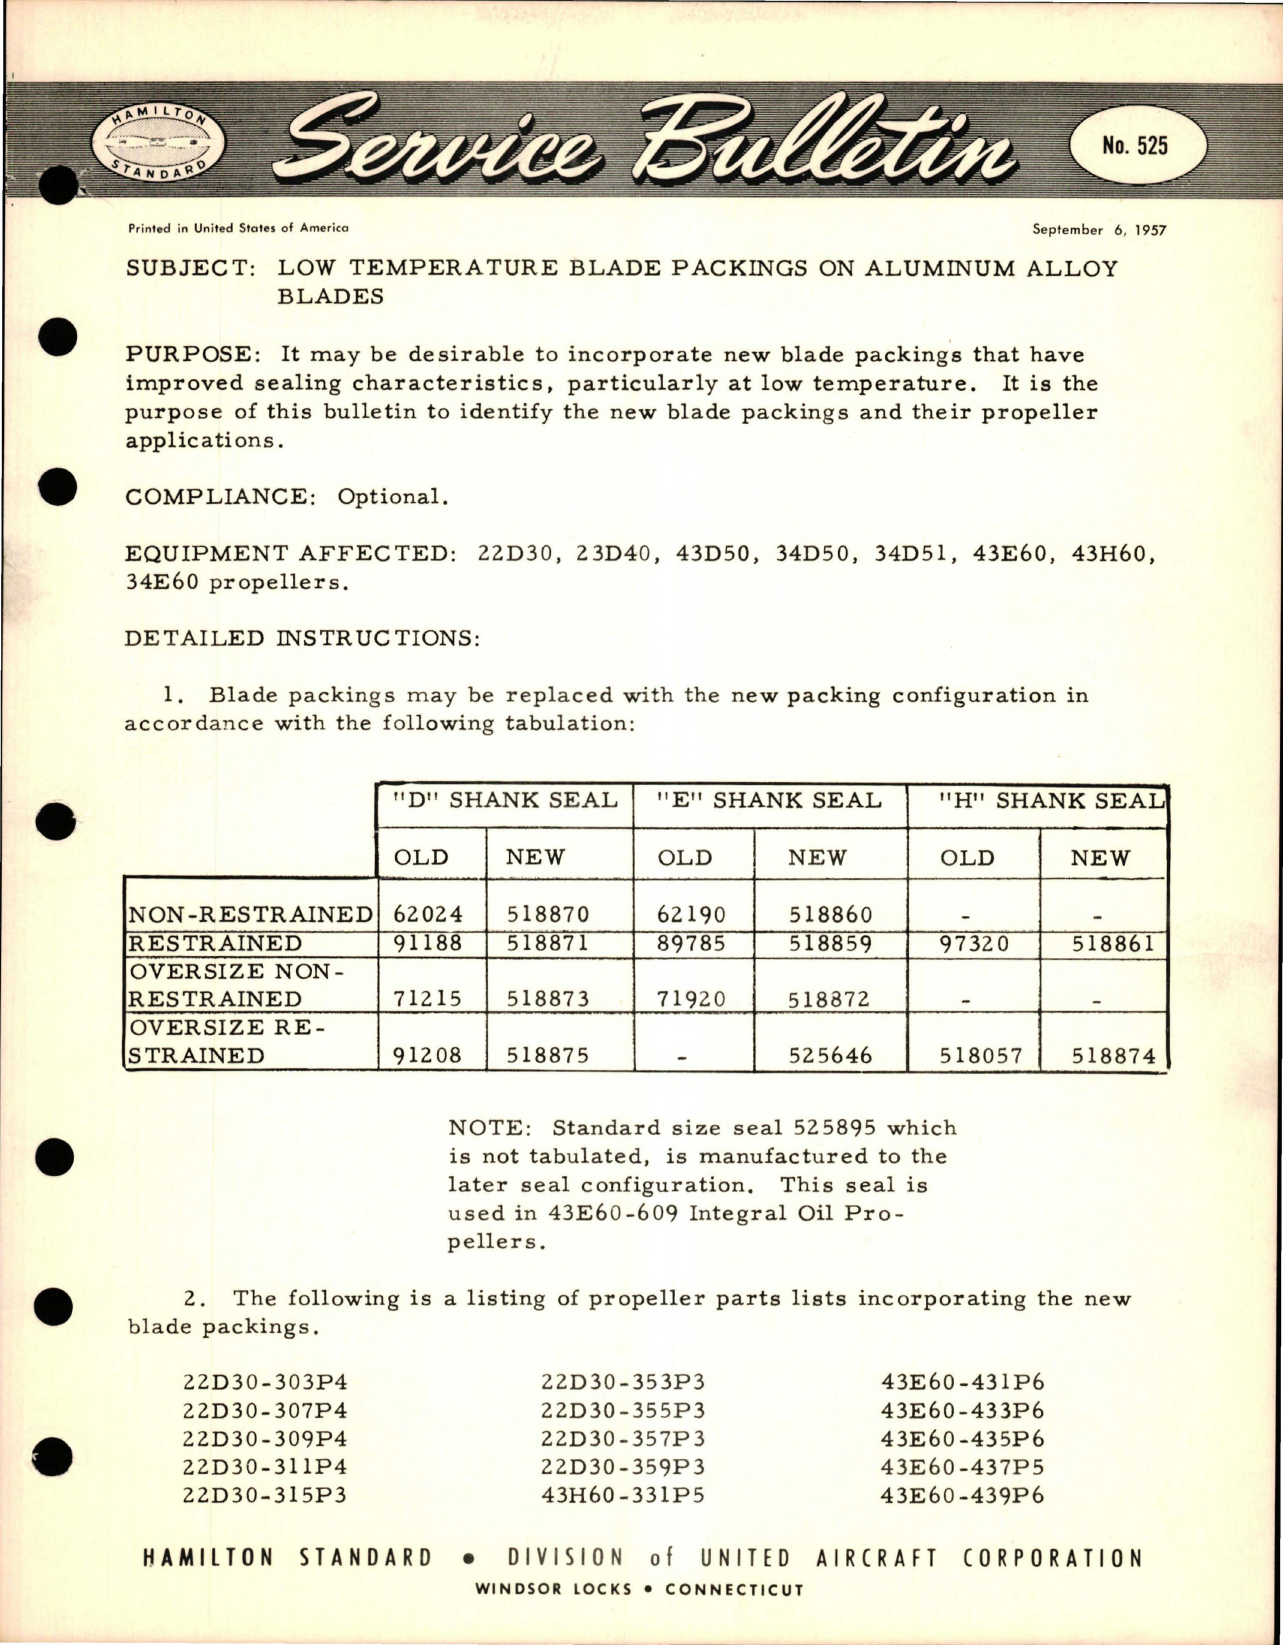 Sample page 1 from AirCorps Library document: Low Temperature Blade Packings on Aluminum Alloy Blade